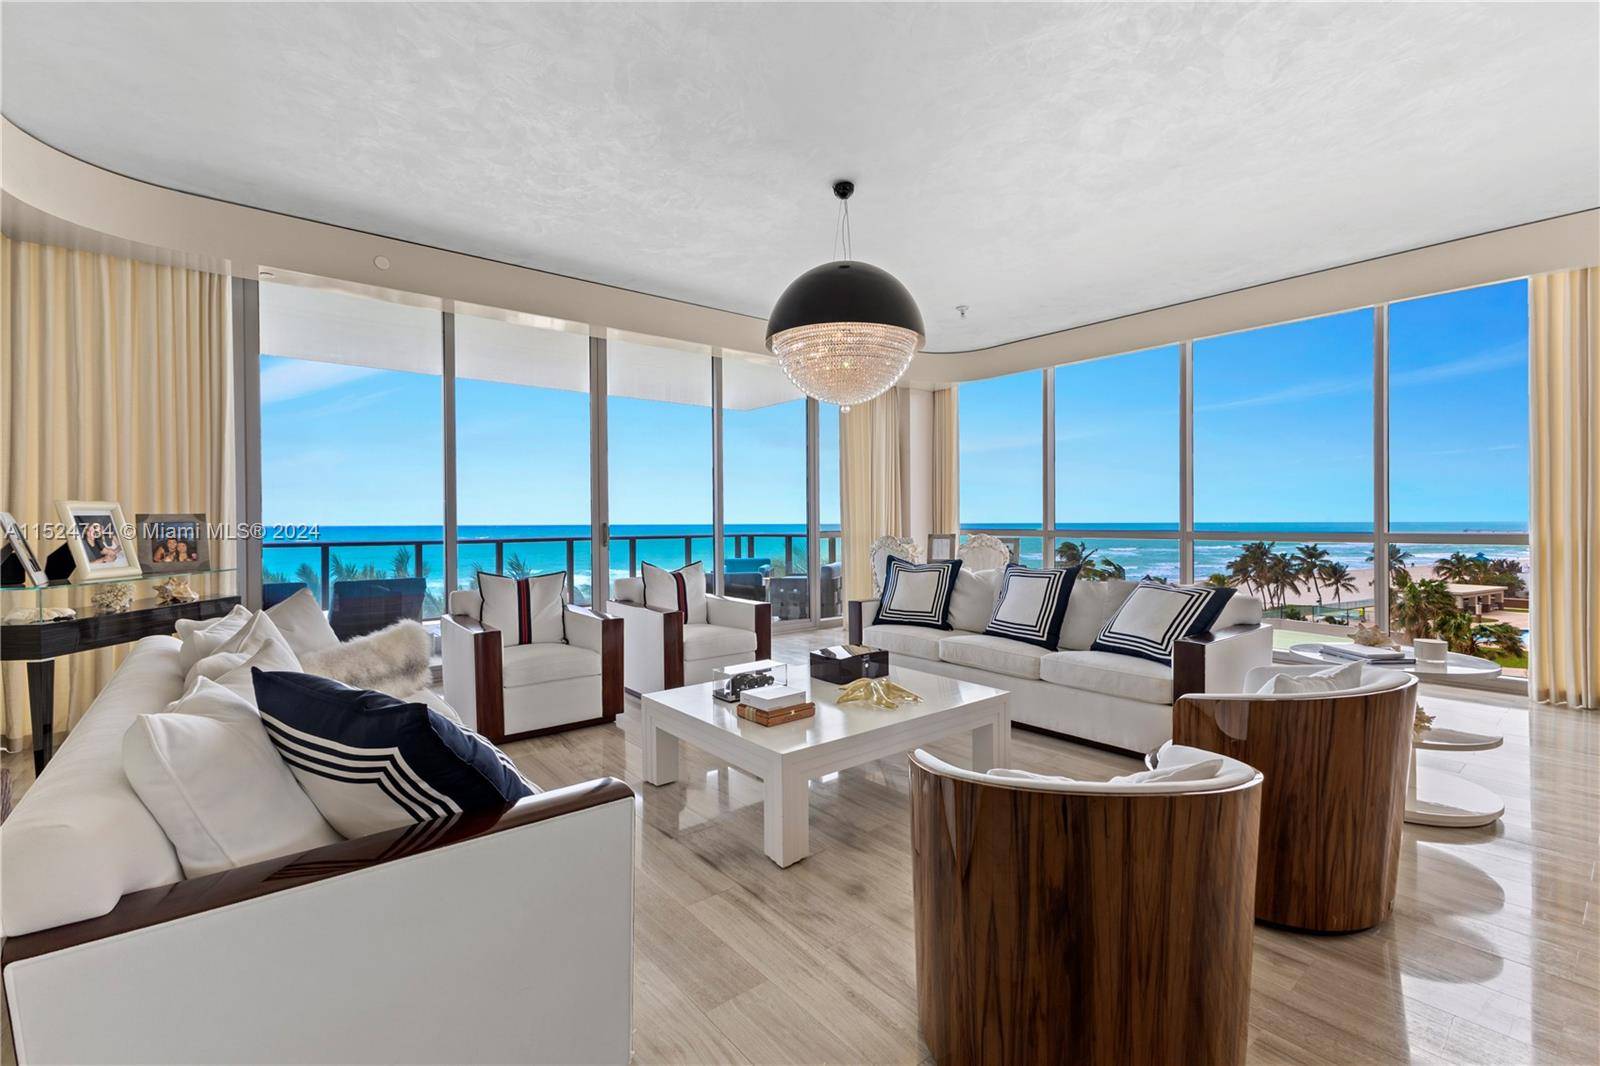 Spectacular furnished south corner residence at Mansions at Acqualina with magnificent views, upgrades and finishes.